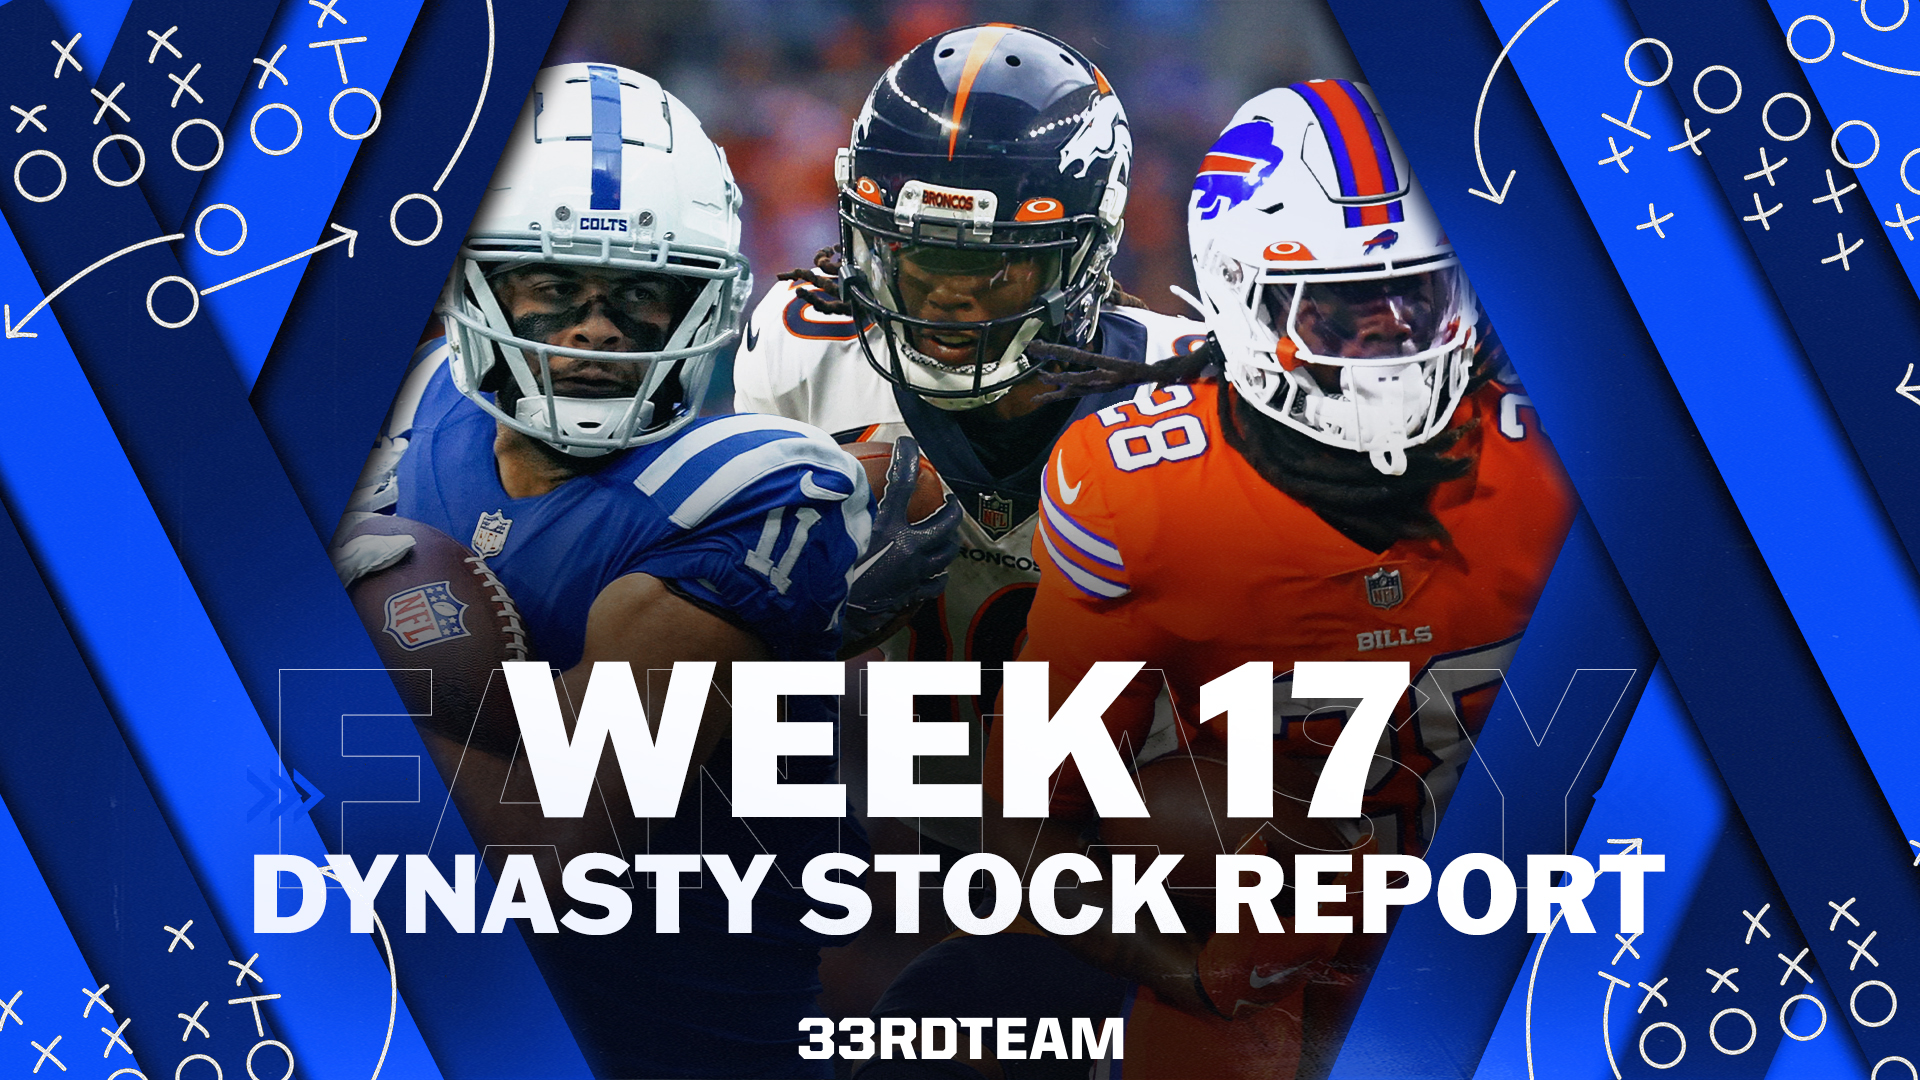 Dynasty Stock Report for NFL Week 17 Fantasy Football